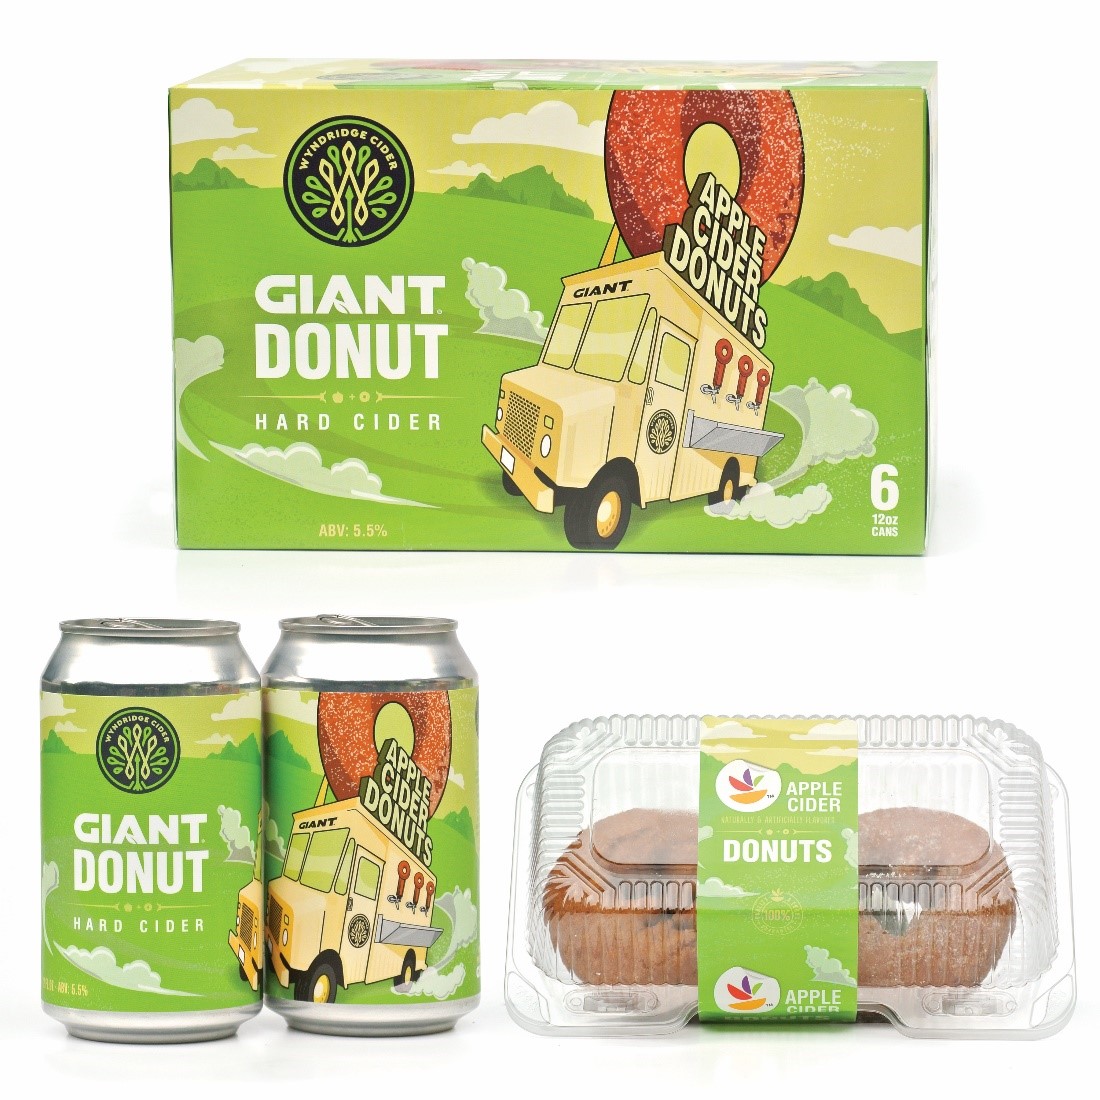 Pictured below is The GIANT Company’s GIANT Donut Hard Cider box design, can design, and apple cider donut packaging: